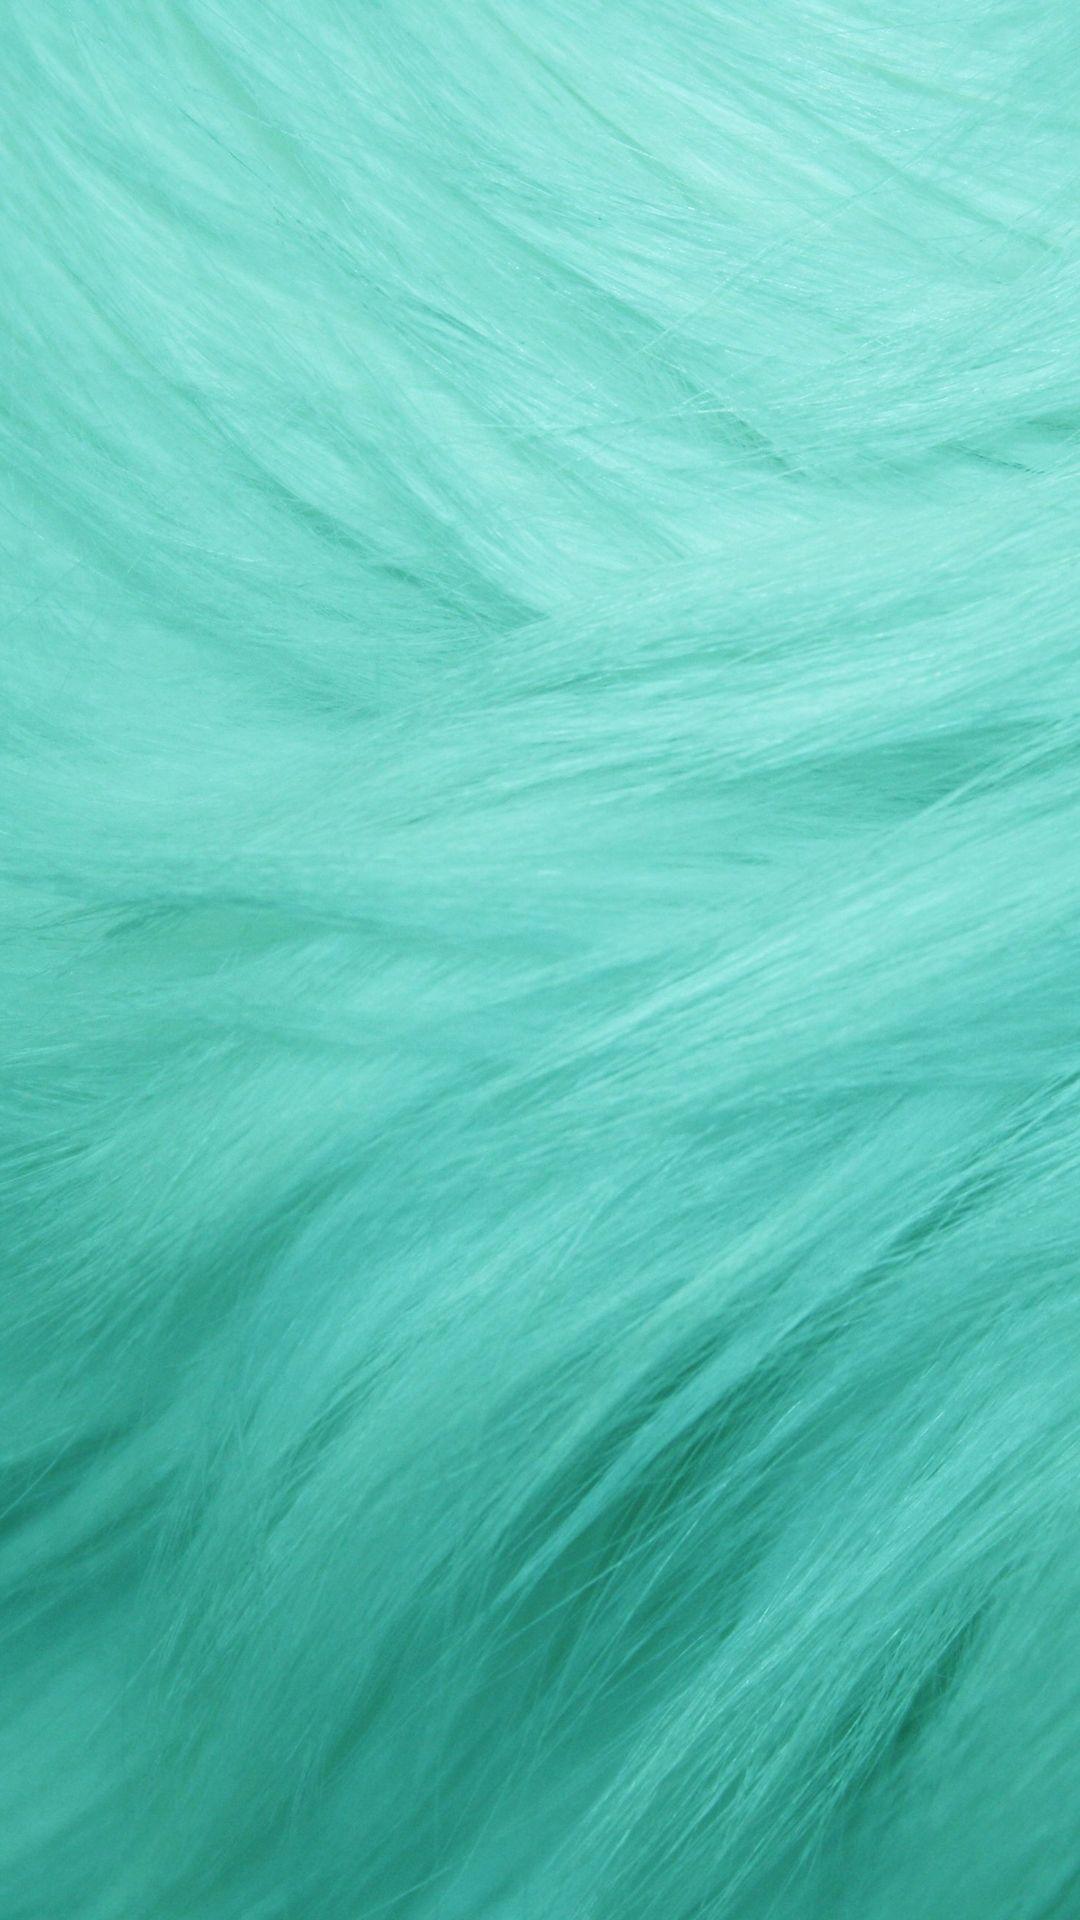 A close up of some green fur - Turquoise